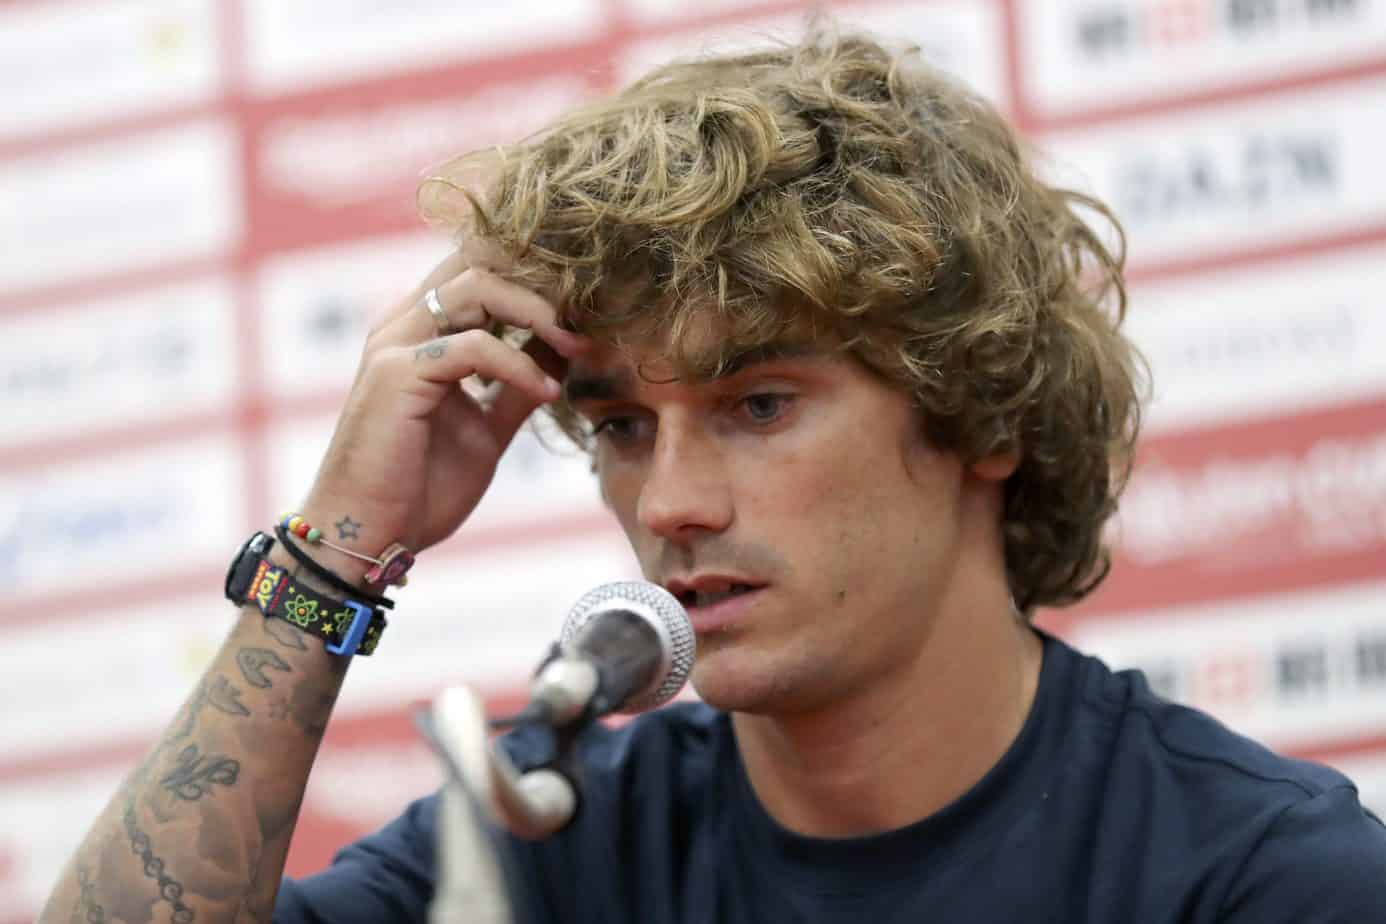 Barcelona star Antoine Griezmann was removed as a spokesperson for Yu-Gi-Oh! after a video shows him and Ousmane Dembele seemingly mocking Asians